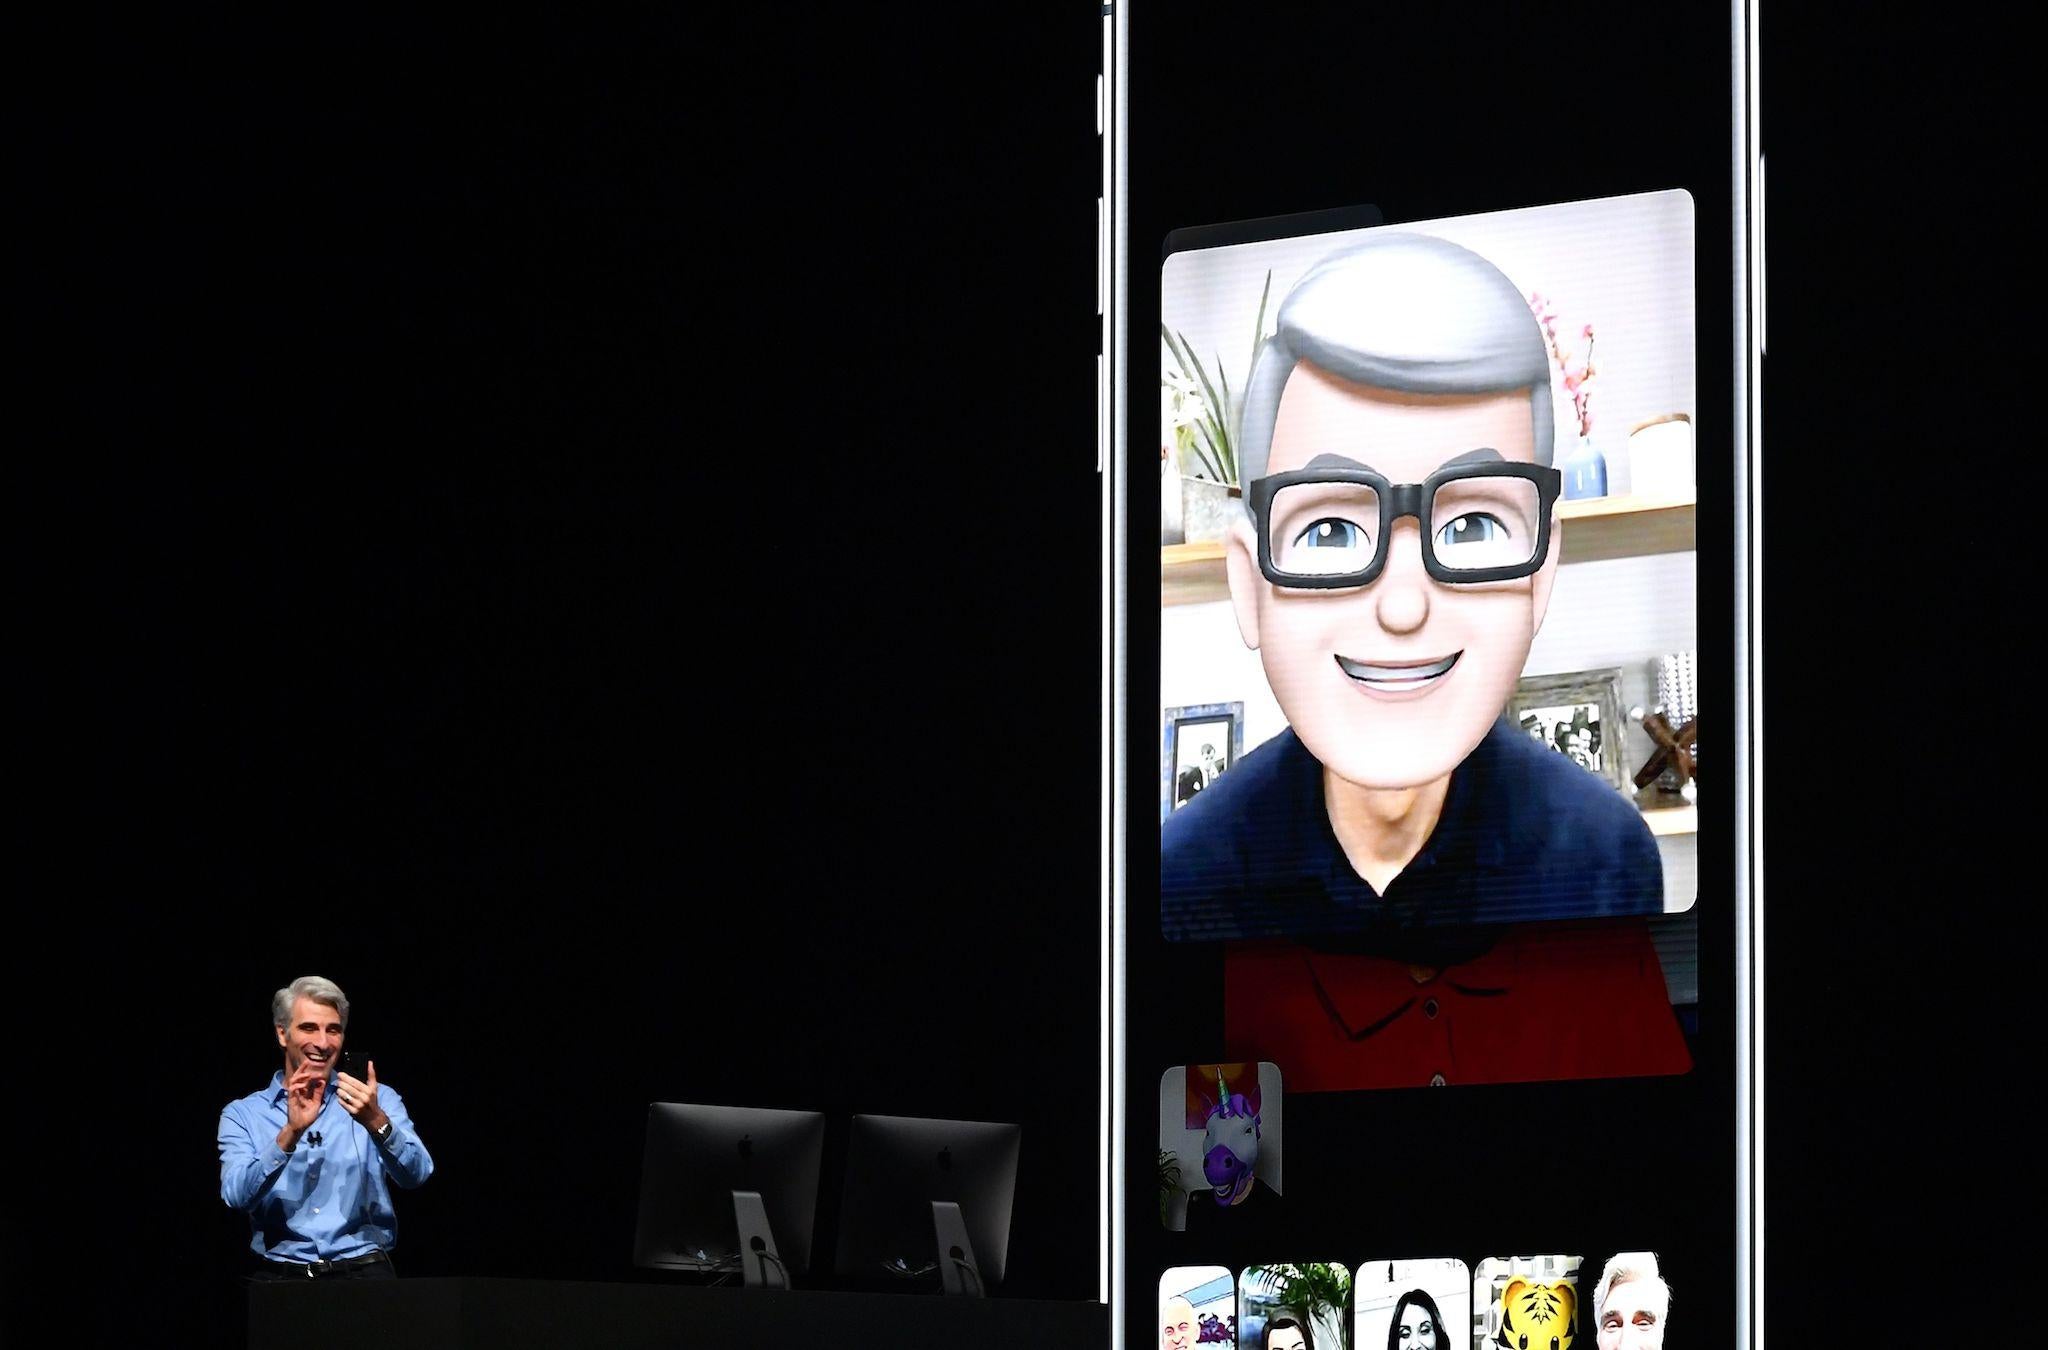 Apple CEO Tim Cook (L) speaks using his Memoji during a group FaceTime call on stage during Apple's Worldwide Developer Conference (WWDC) at the San Jose Convention Centerin San Jose, California